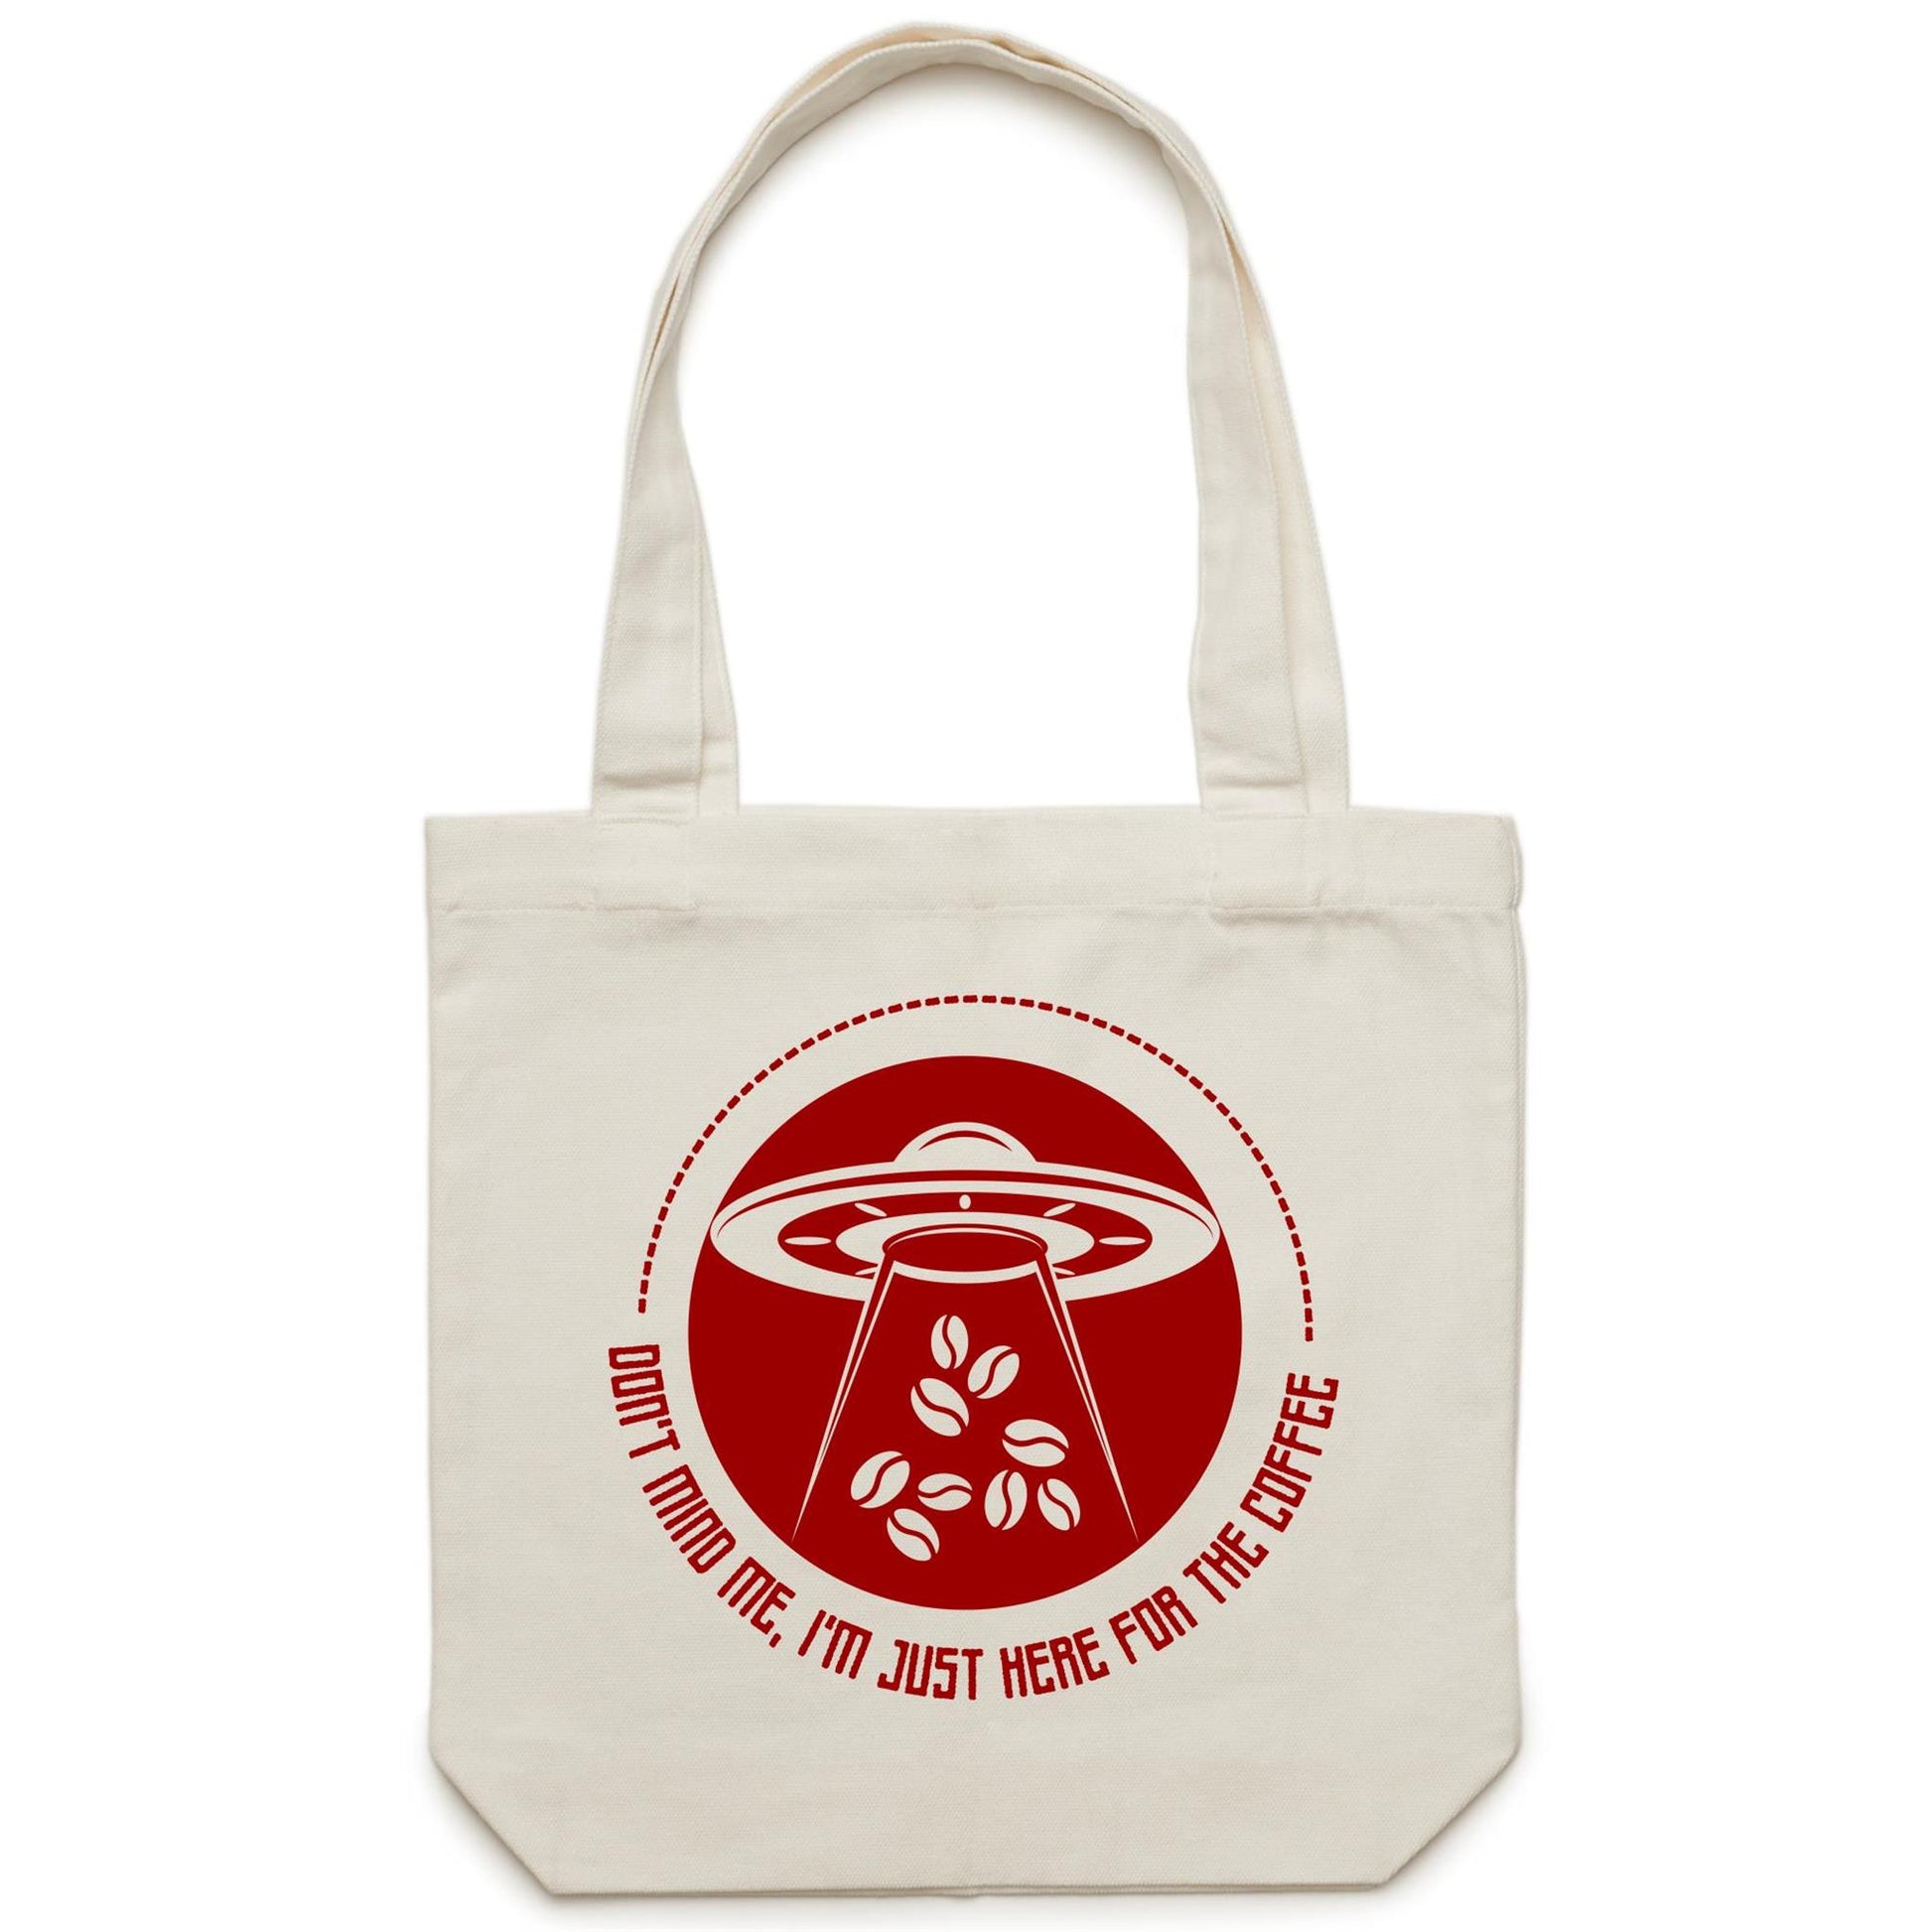 Don't Mind Me, I'm Just Here For The Coffee, Alien UFO - Canvas Tote Bag Cream One Size Tote Bag Coffee Sci Fi